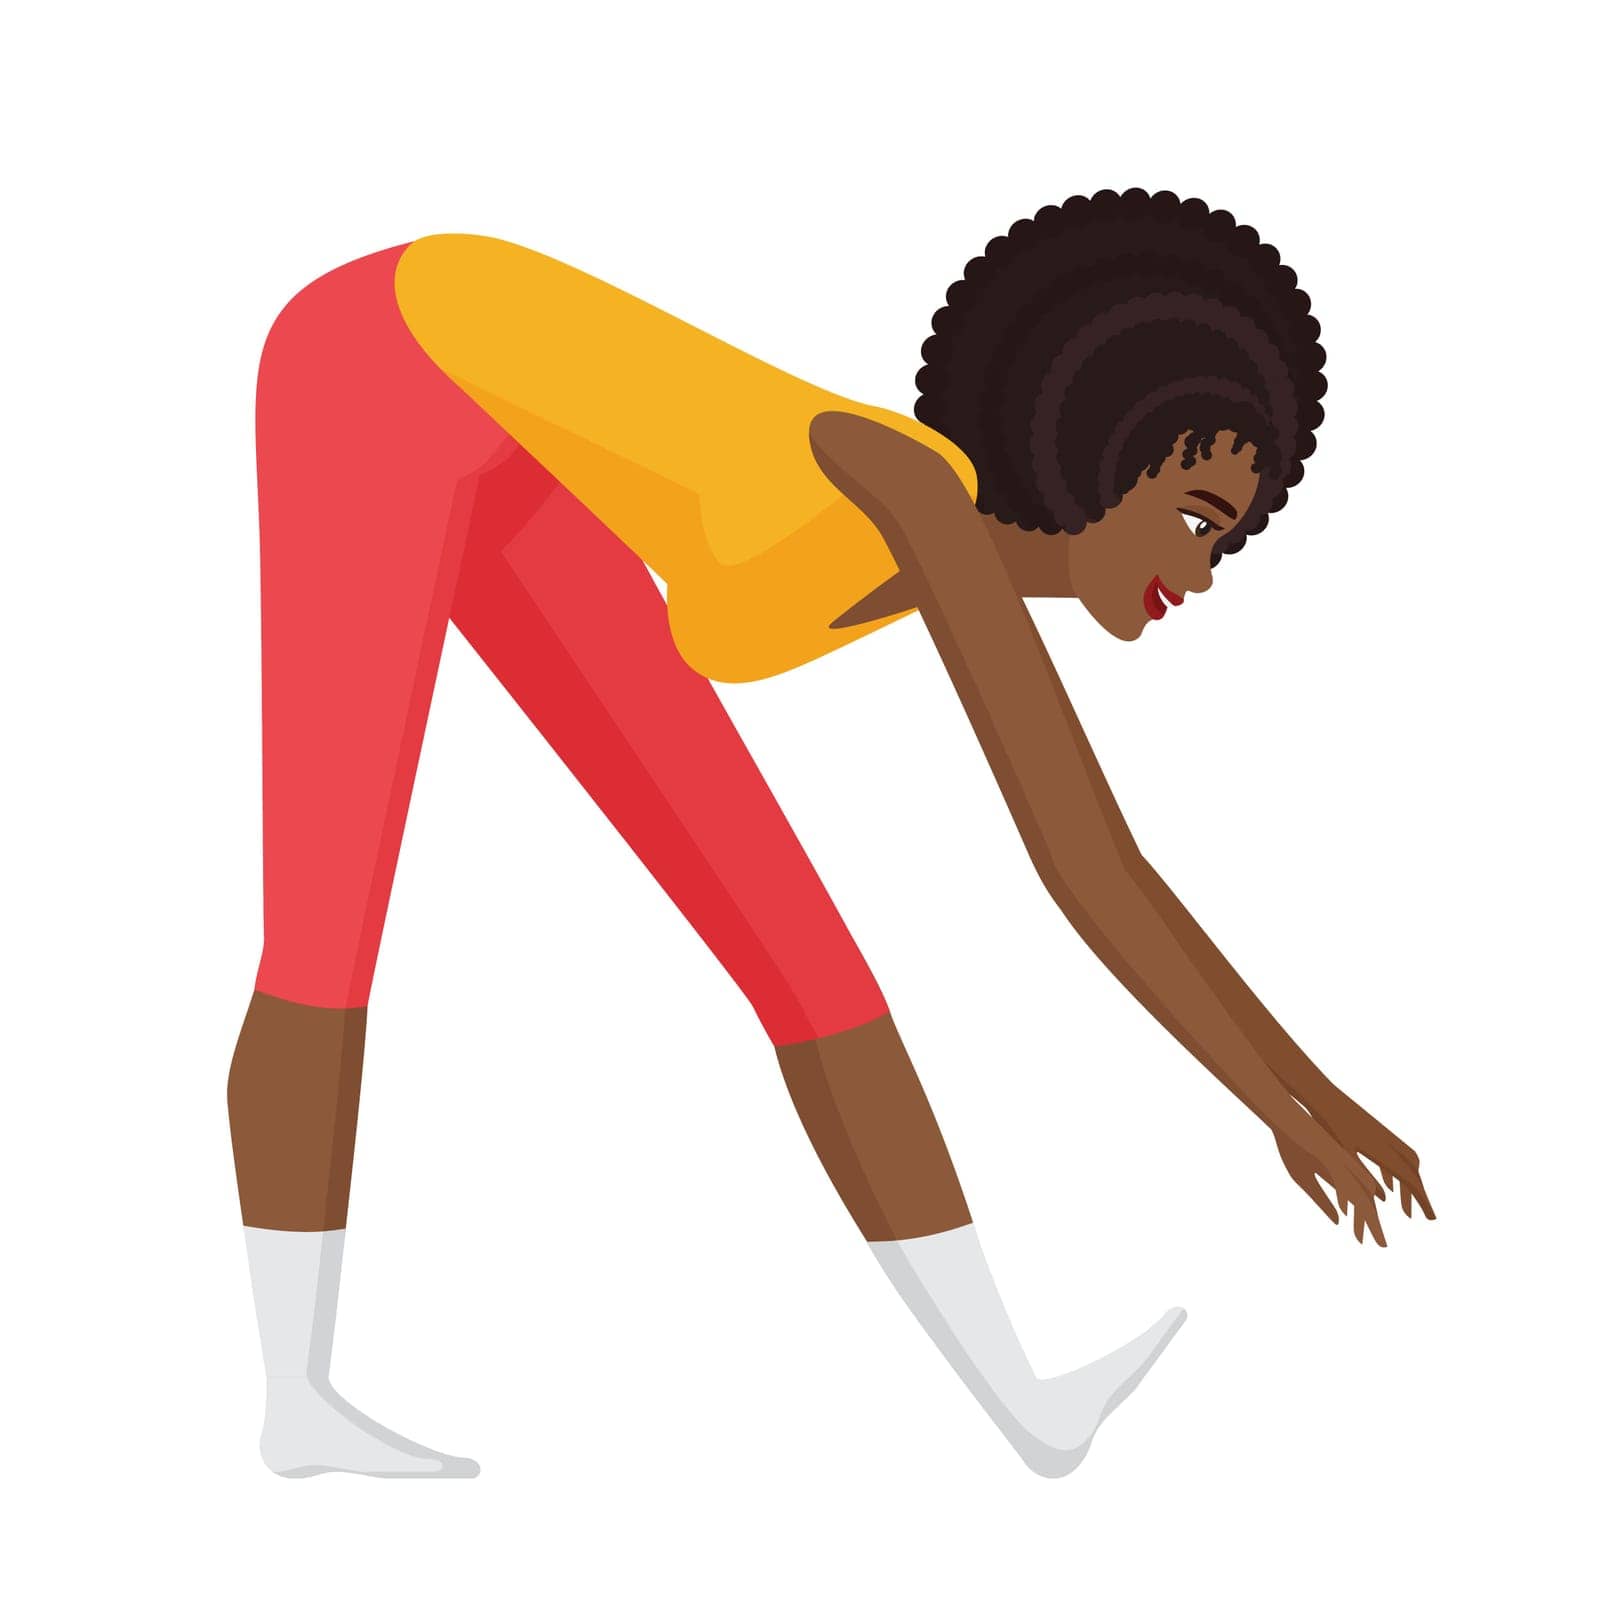 Personal sport trainer doing stretch. Yoga practice, pilates session vector cartoon illustration